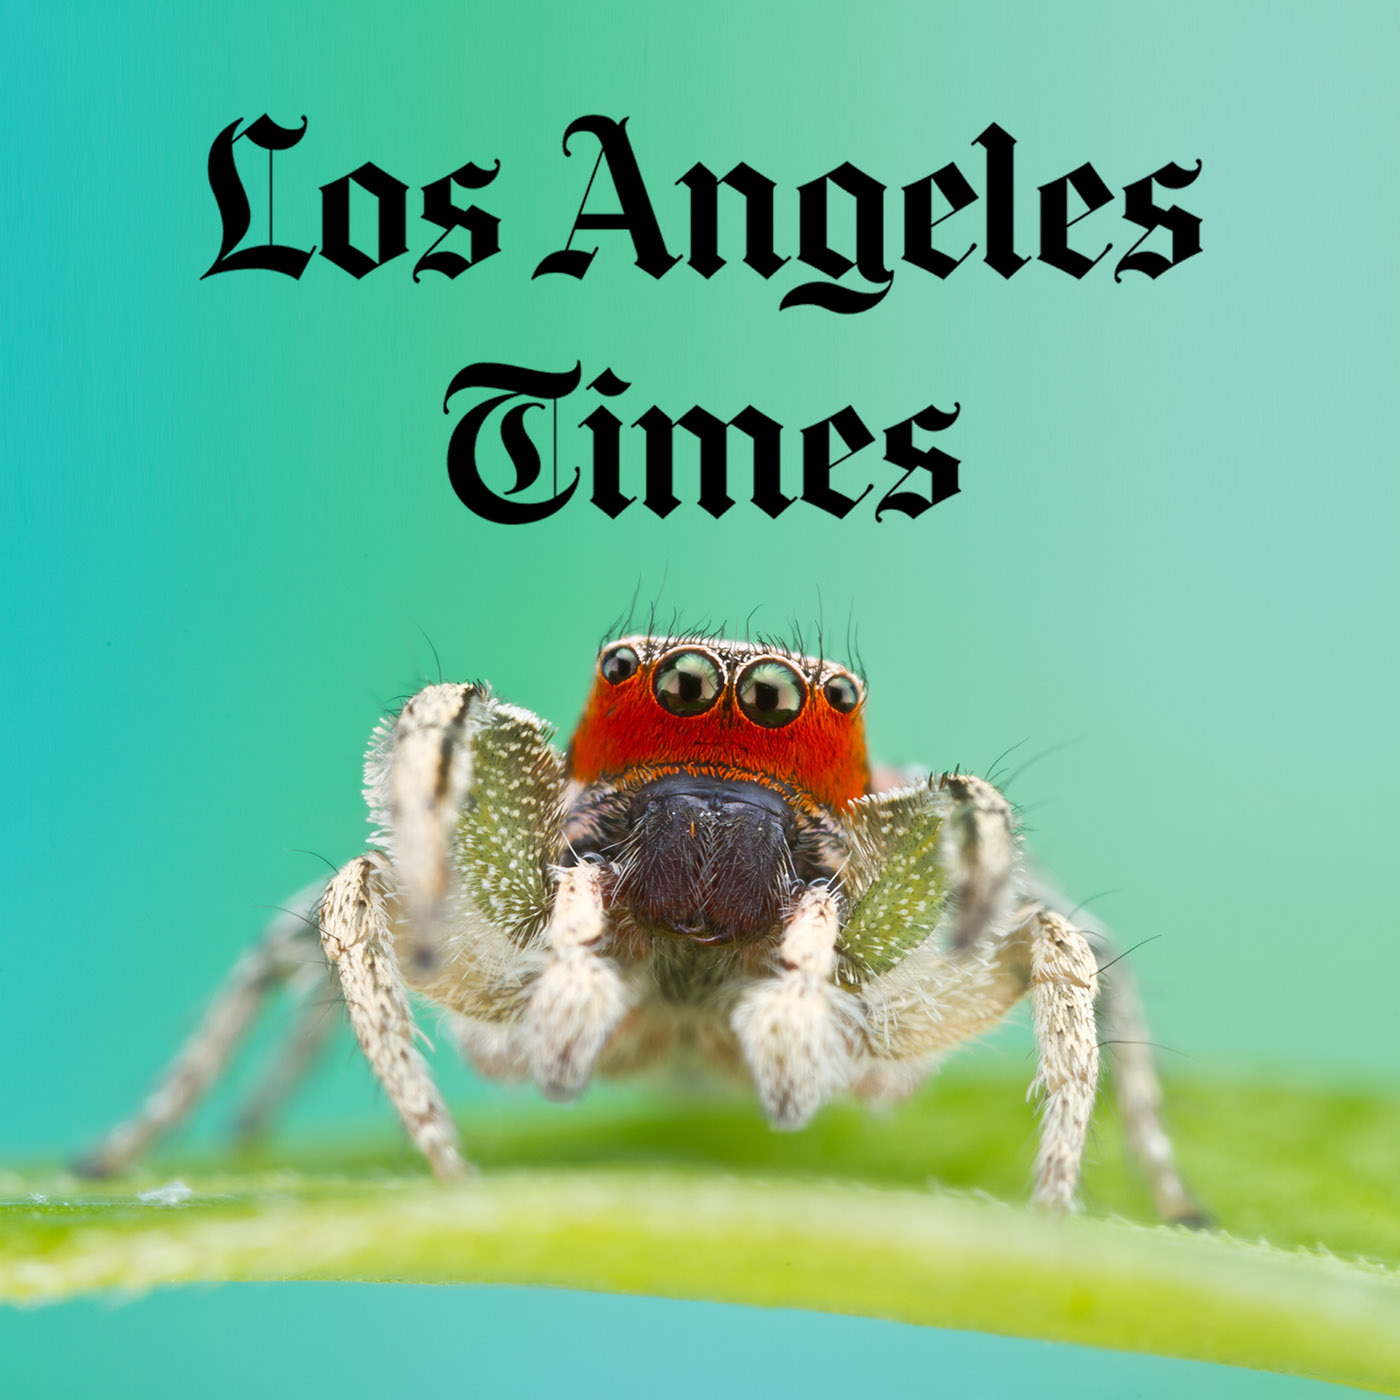 Los Angeles Times coverage of color vision research in Habronattus pyrrithrix